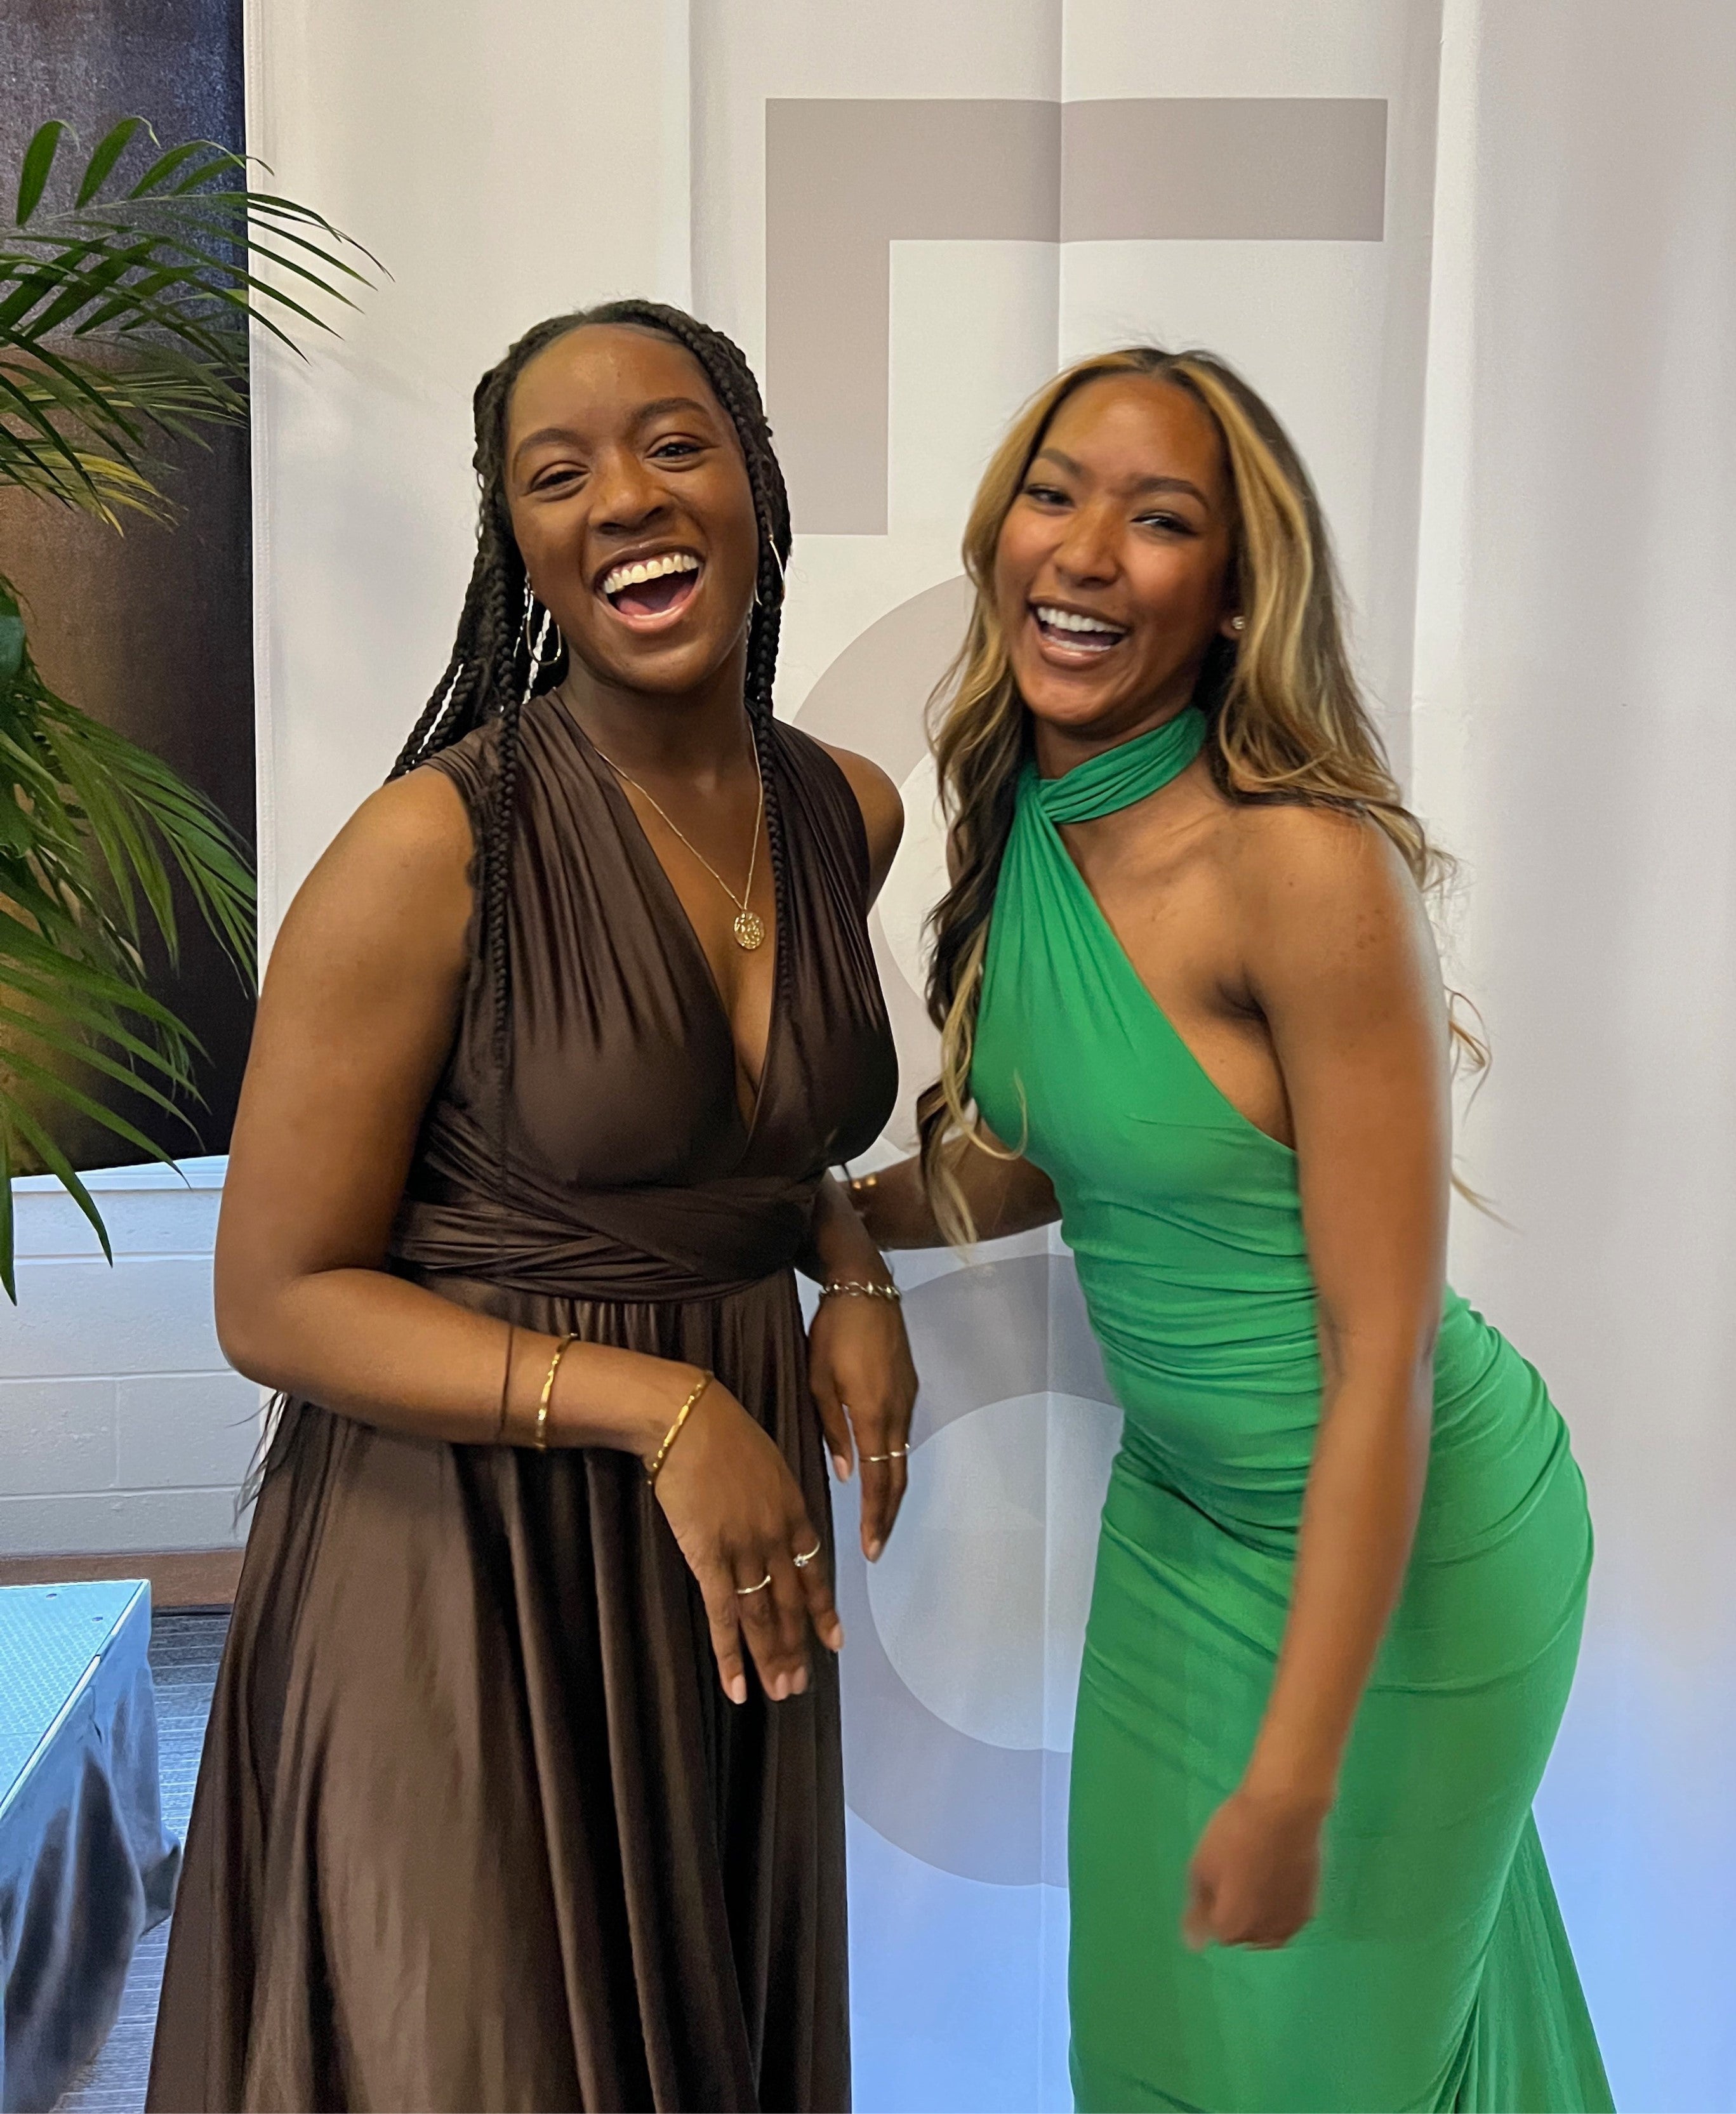 Marianna Sukhu laughs at a formal event with a friend.